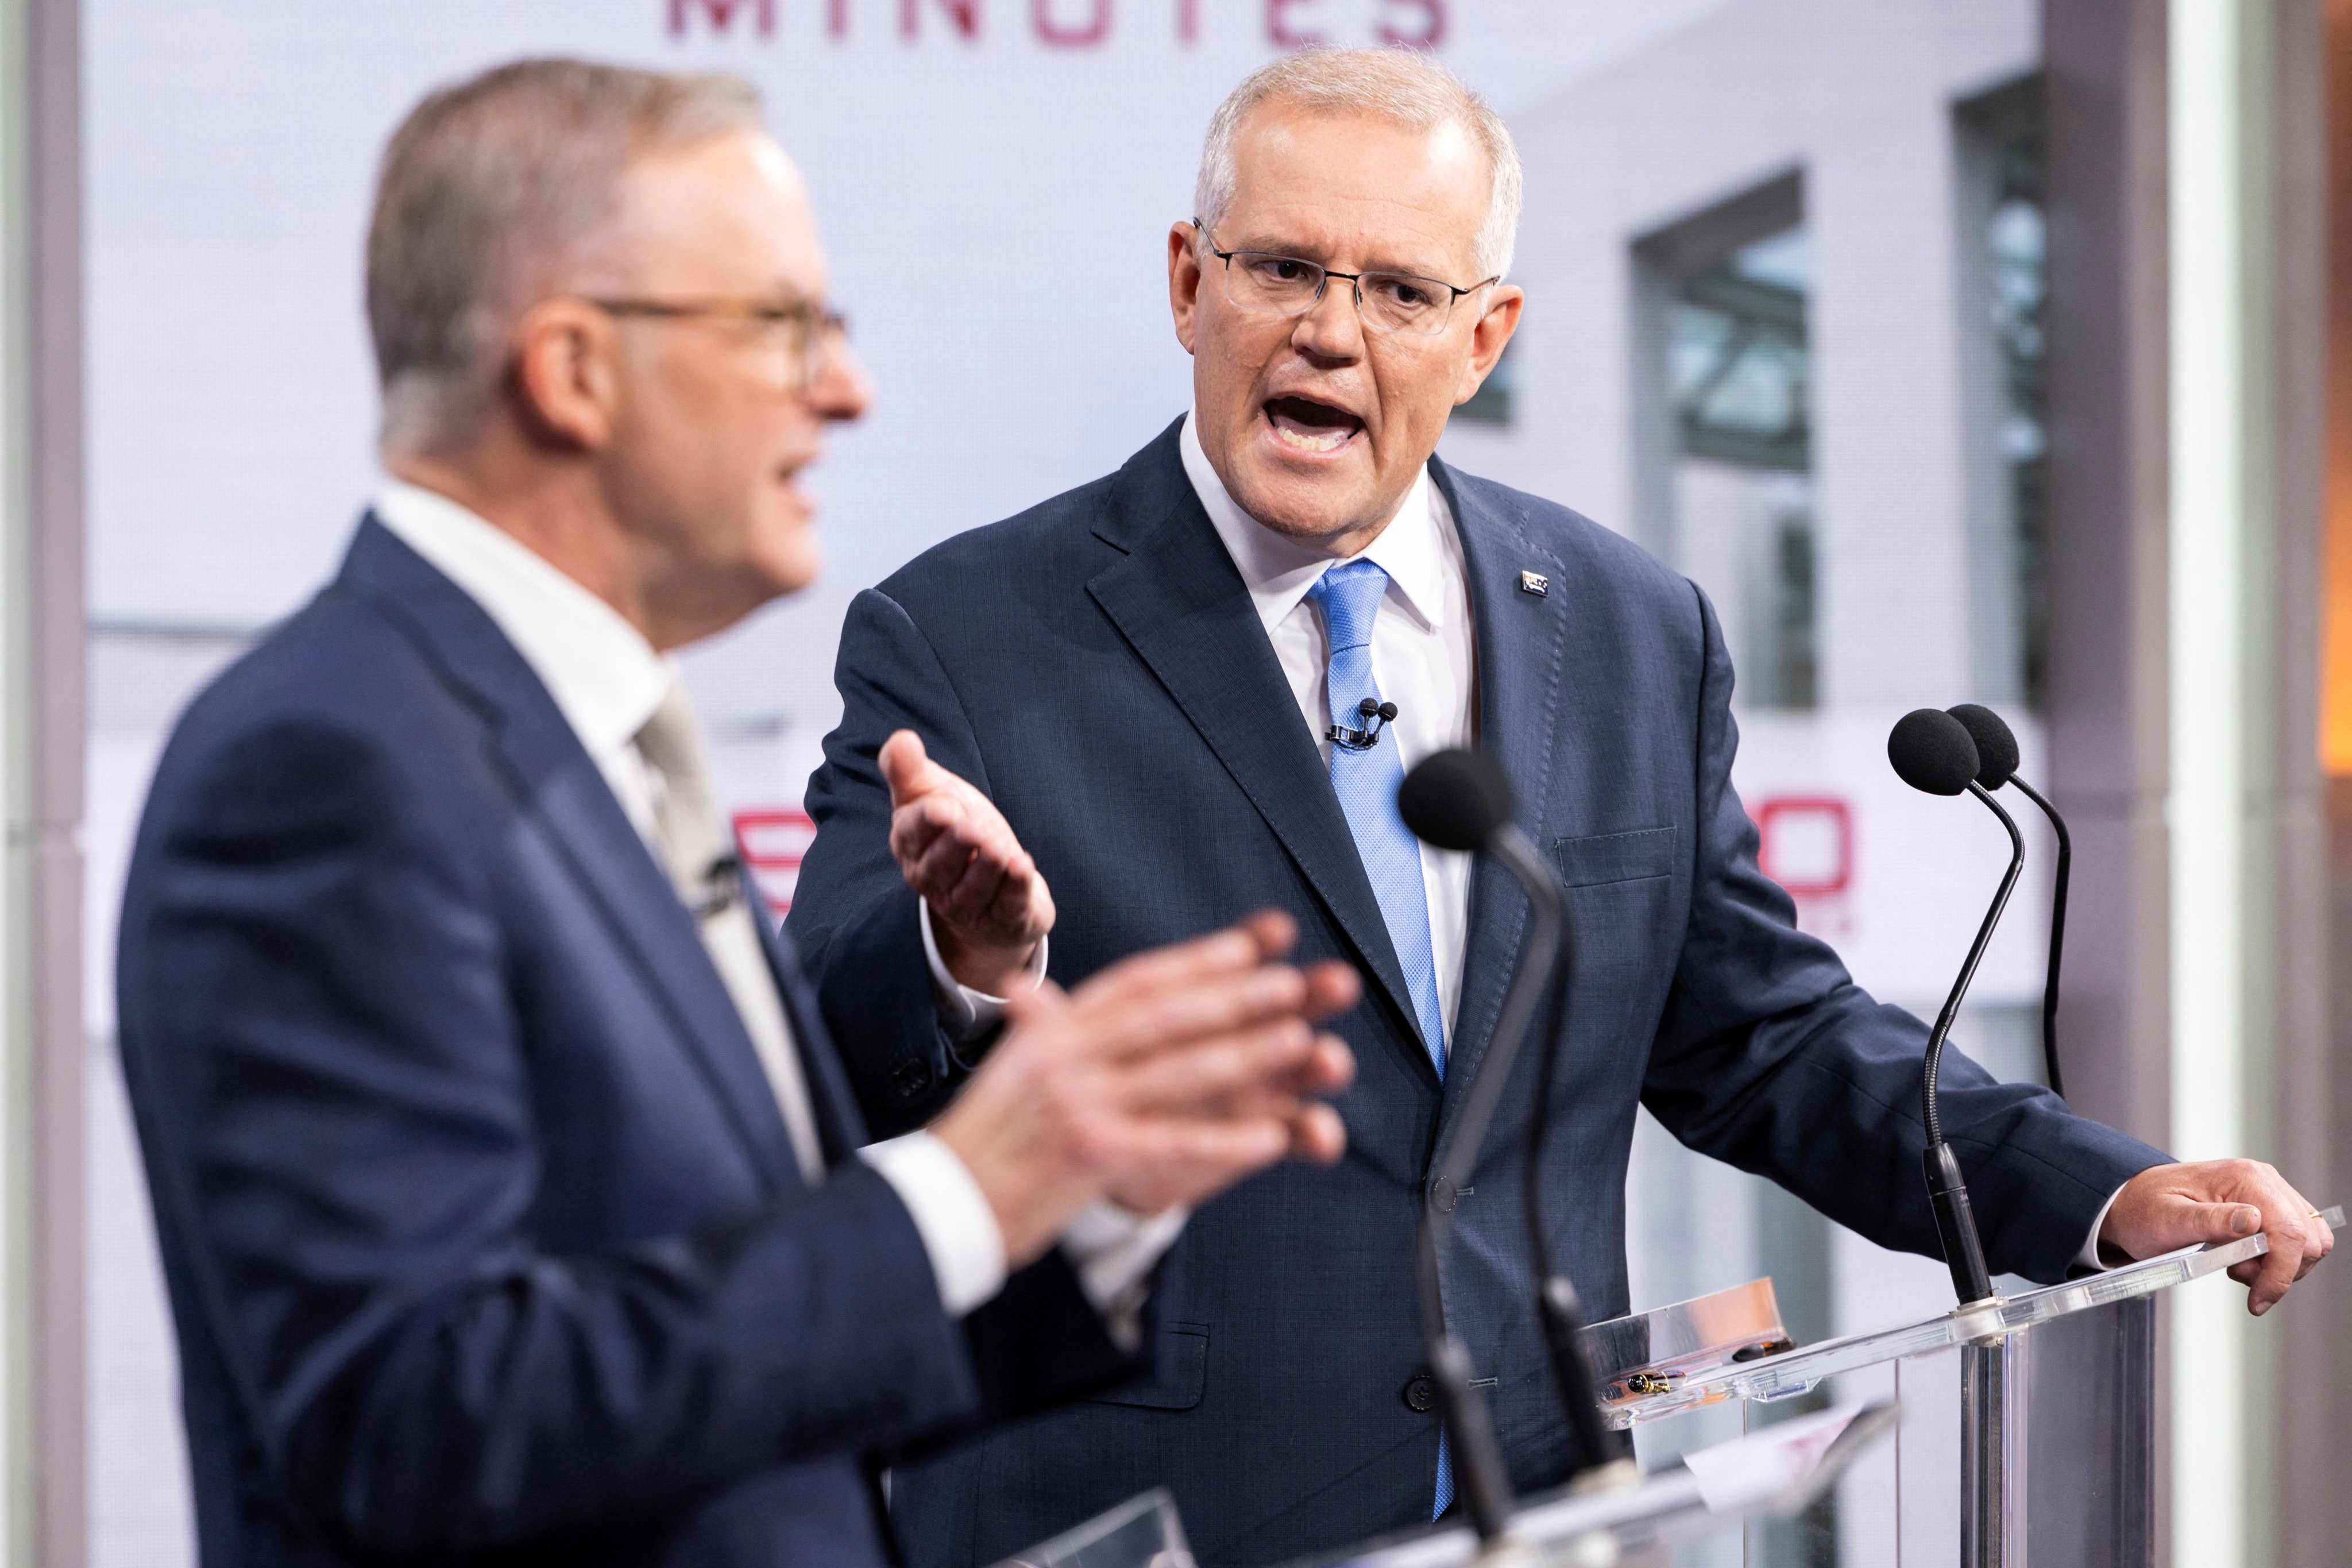 Australian PM Scott Morrison and Opposition Leader Anthony Albanese at the second leaders’ debate on May 8, 2022. Photo: Reuters